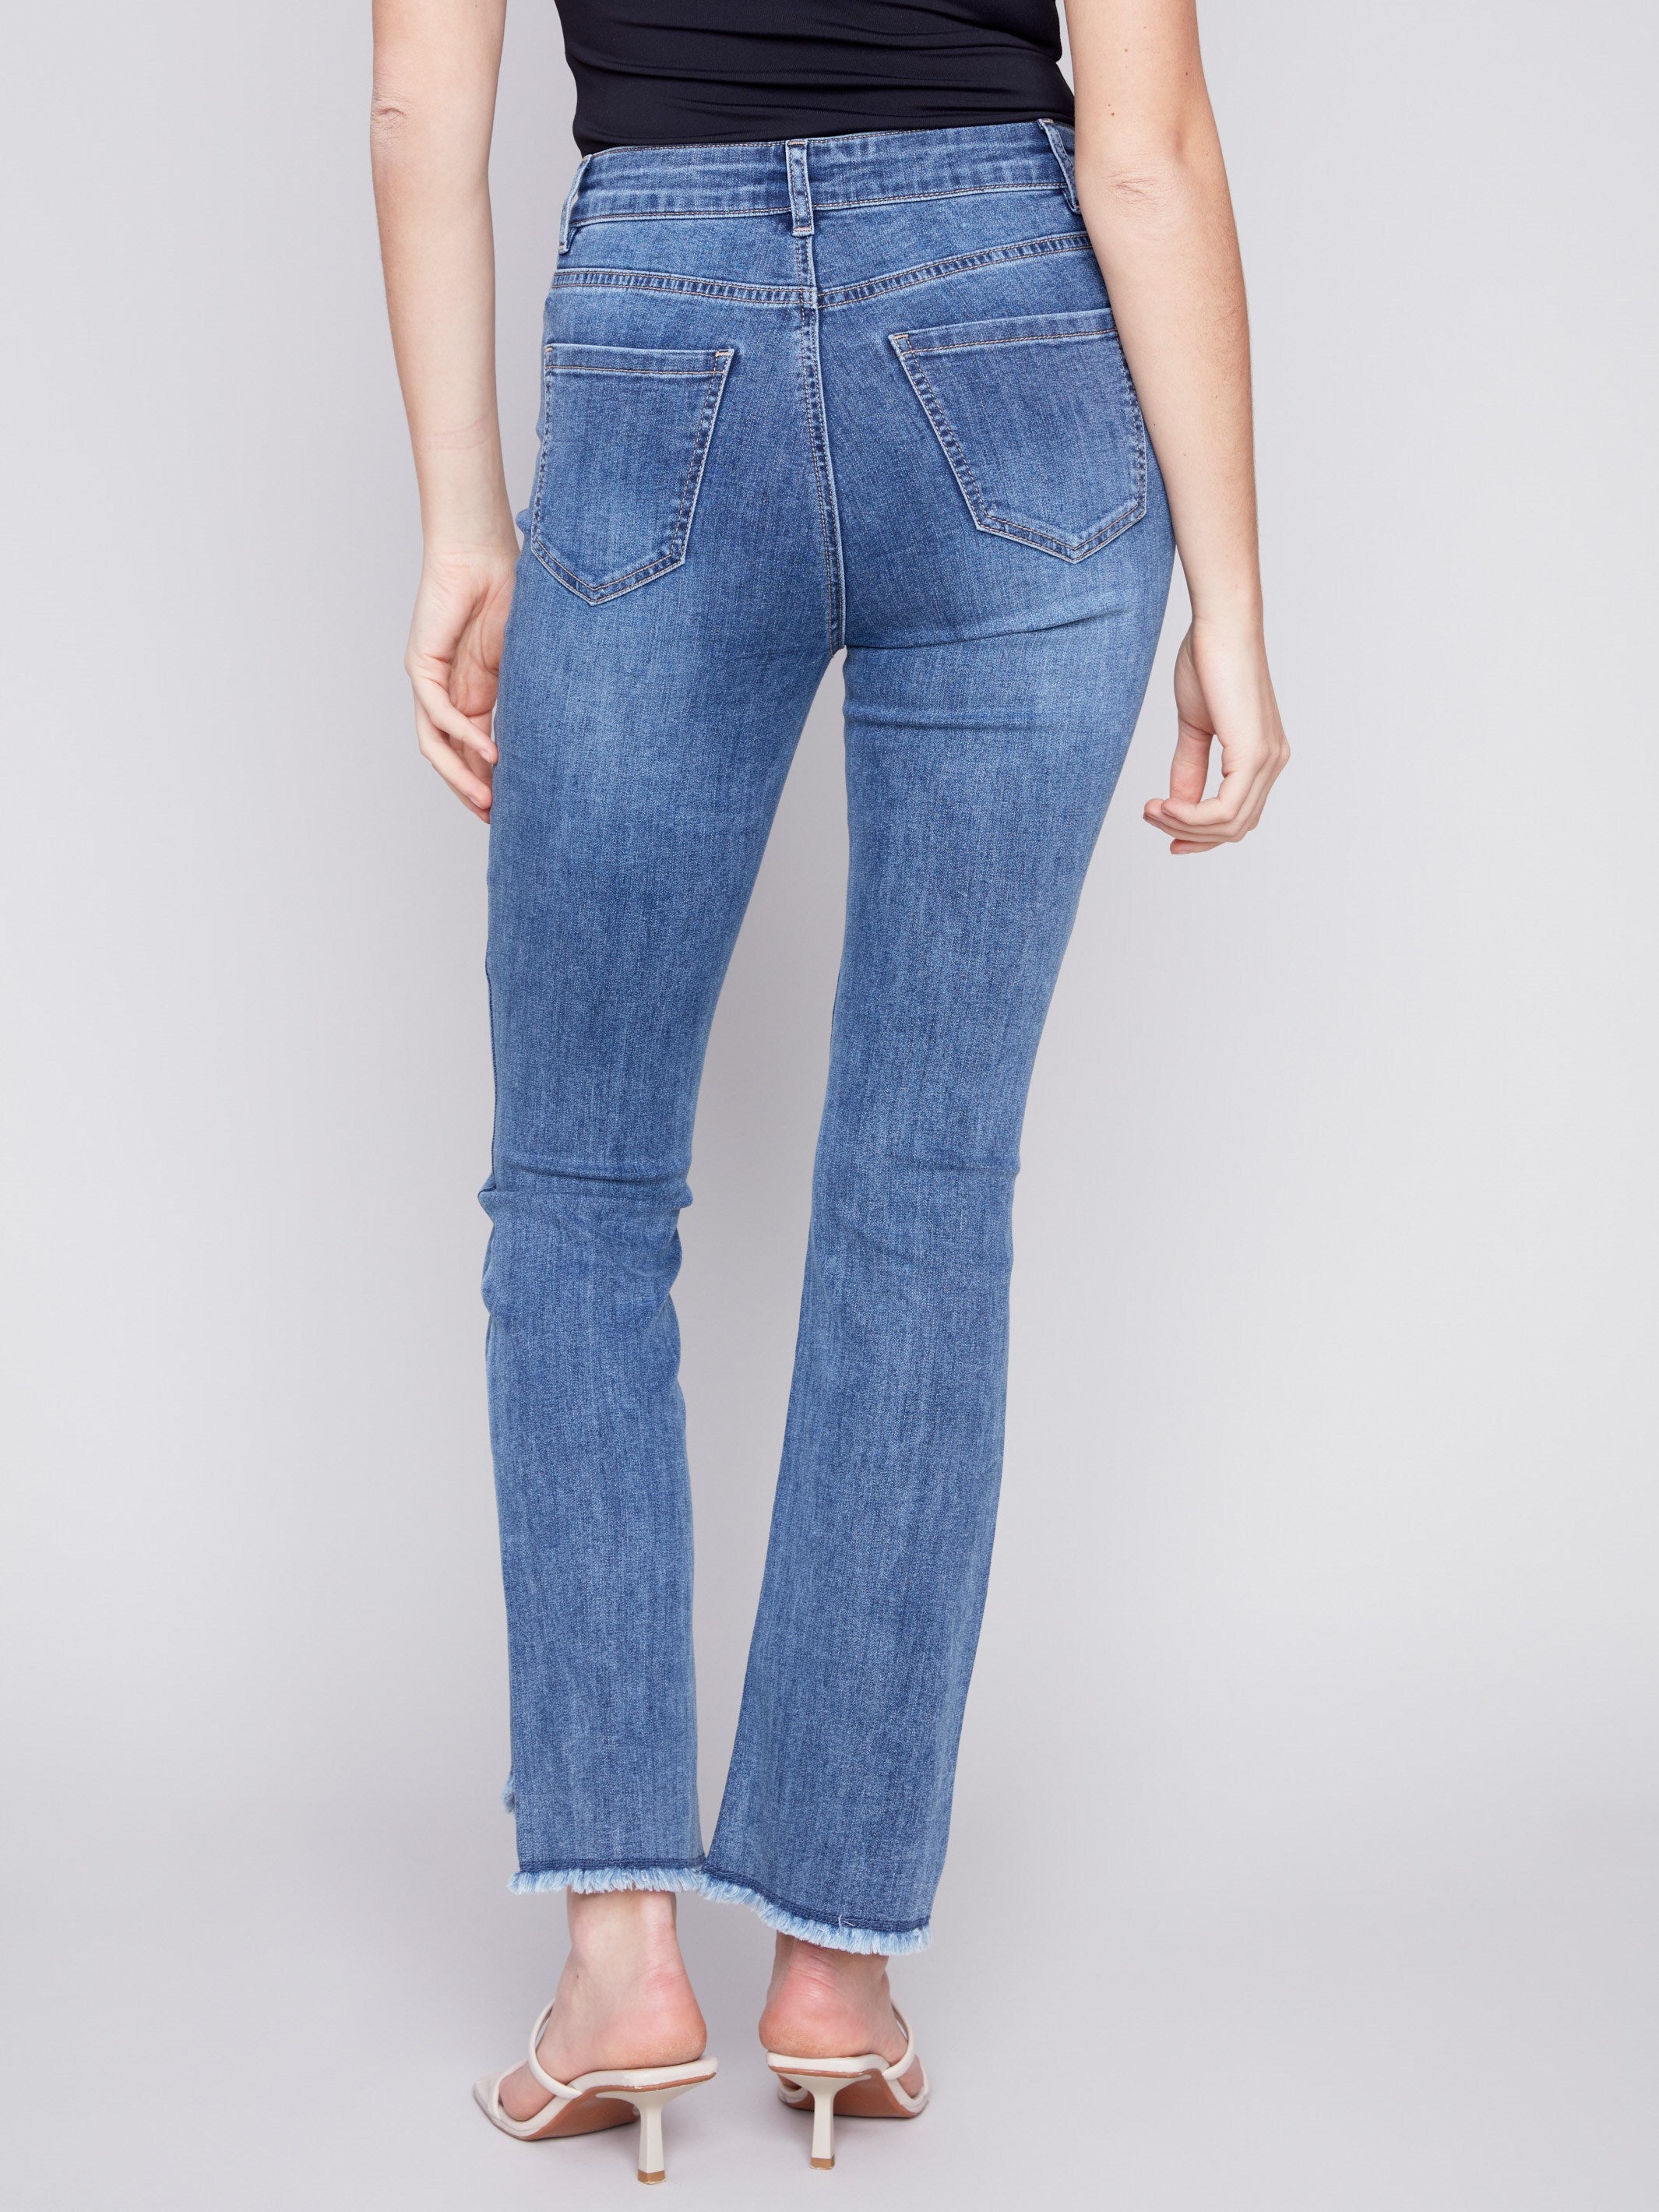 Bootcut Jeans with Asymmetrical Hem - Medium Blue - Charlie B Collection Canada - Image 3